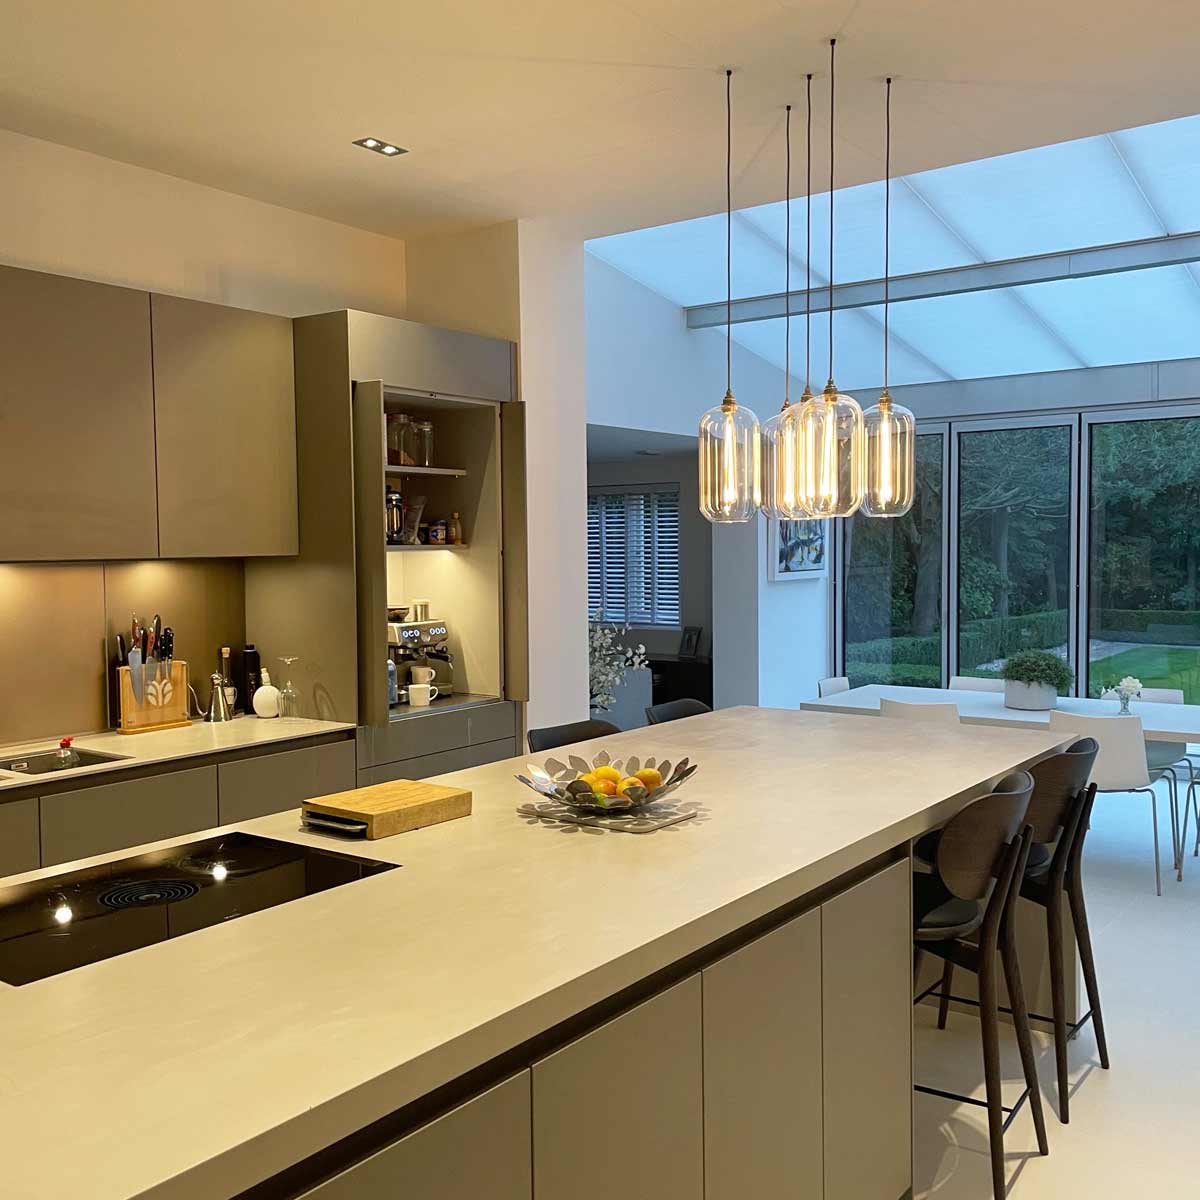 South Charlotte Fine Lighting sell glass pendant lights kitchen, seen here in a cluster above a kitchen island. This particular model is the Charlton Pendant Light in size Medium.